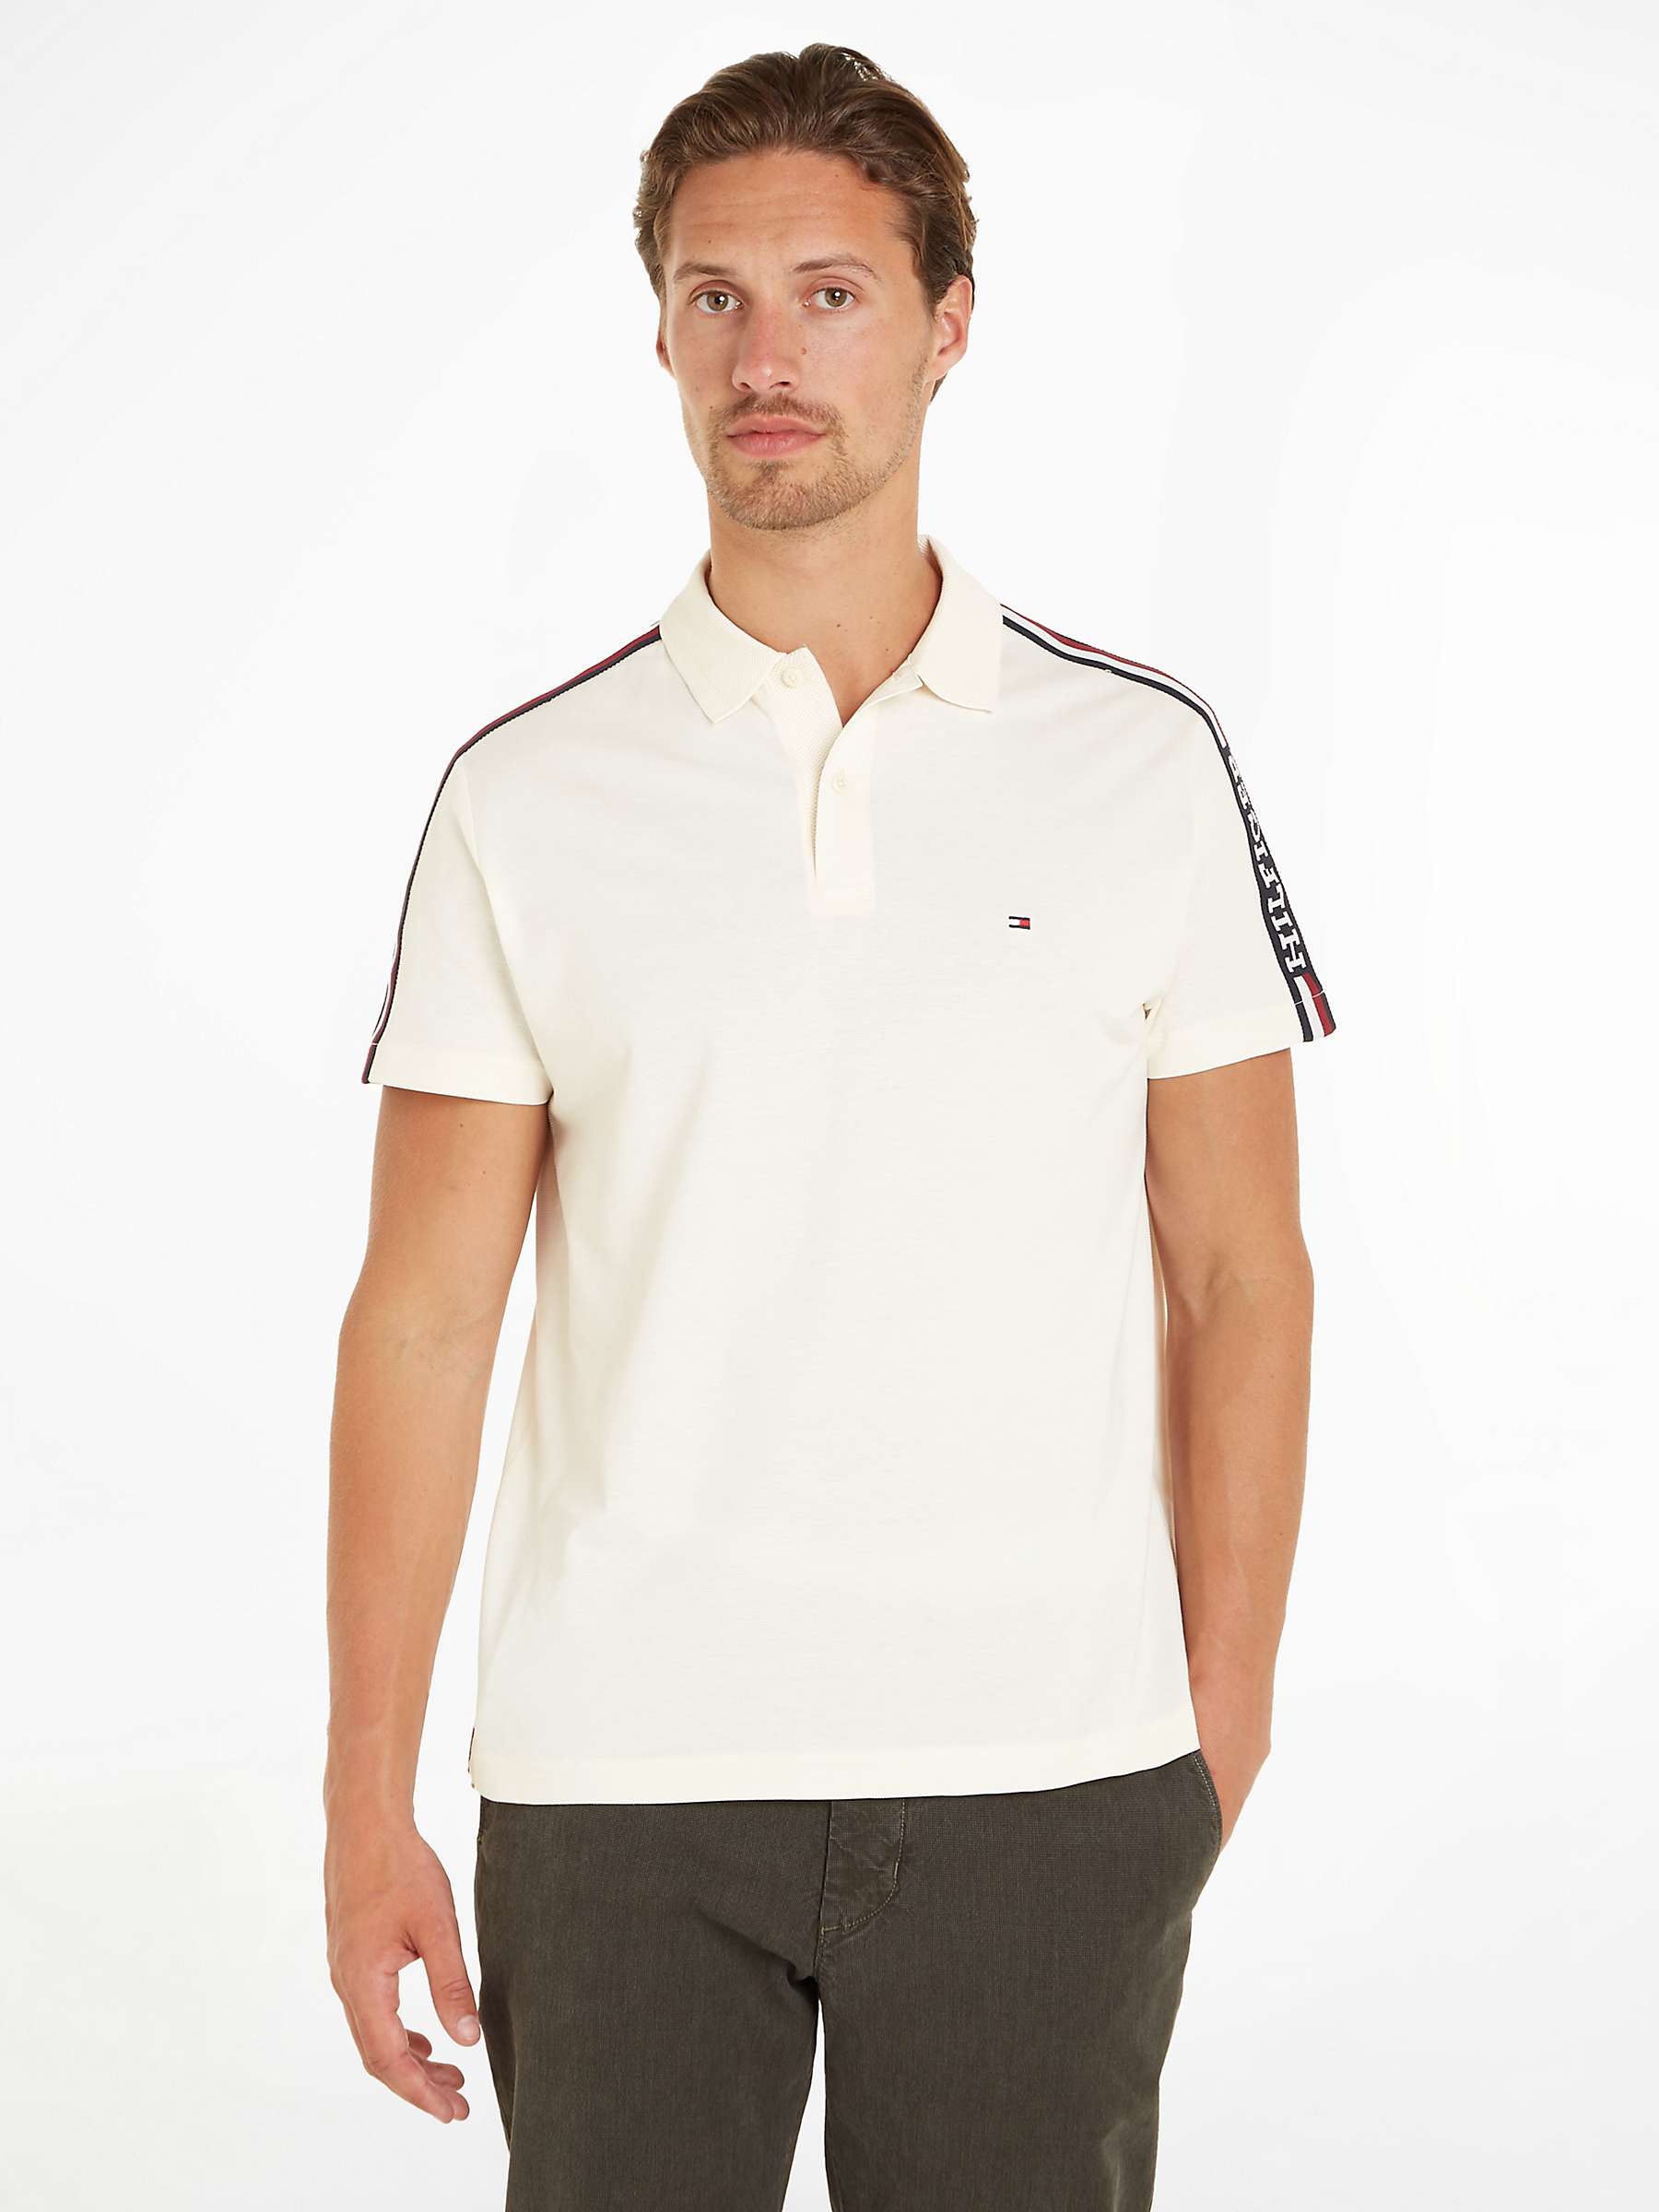 Buy Tommy Hilfiger Global Stripe Short Sleeve Monotype Polo Shirt Online at johnlewis.com